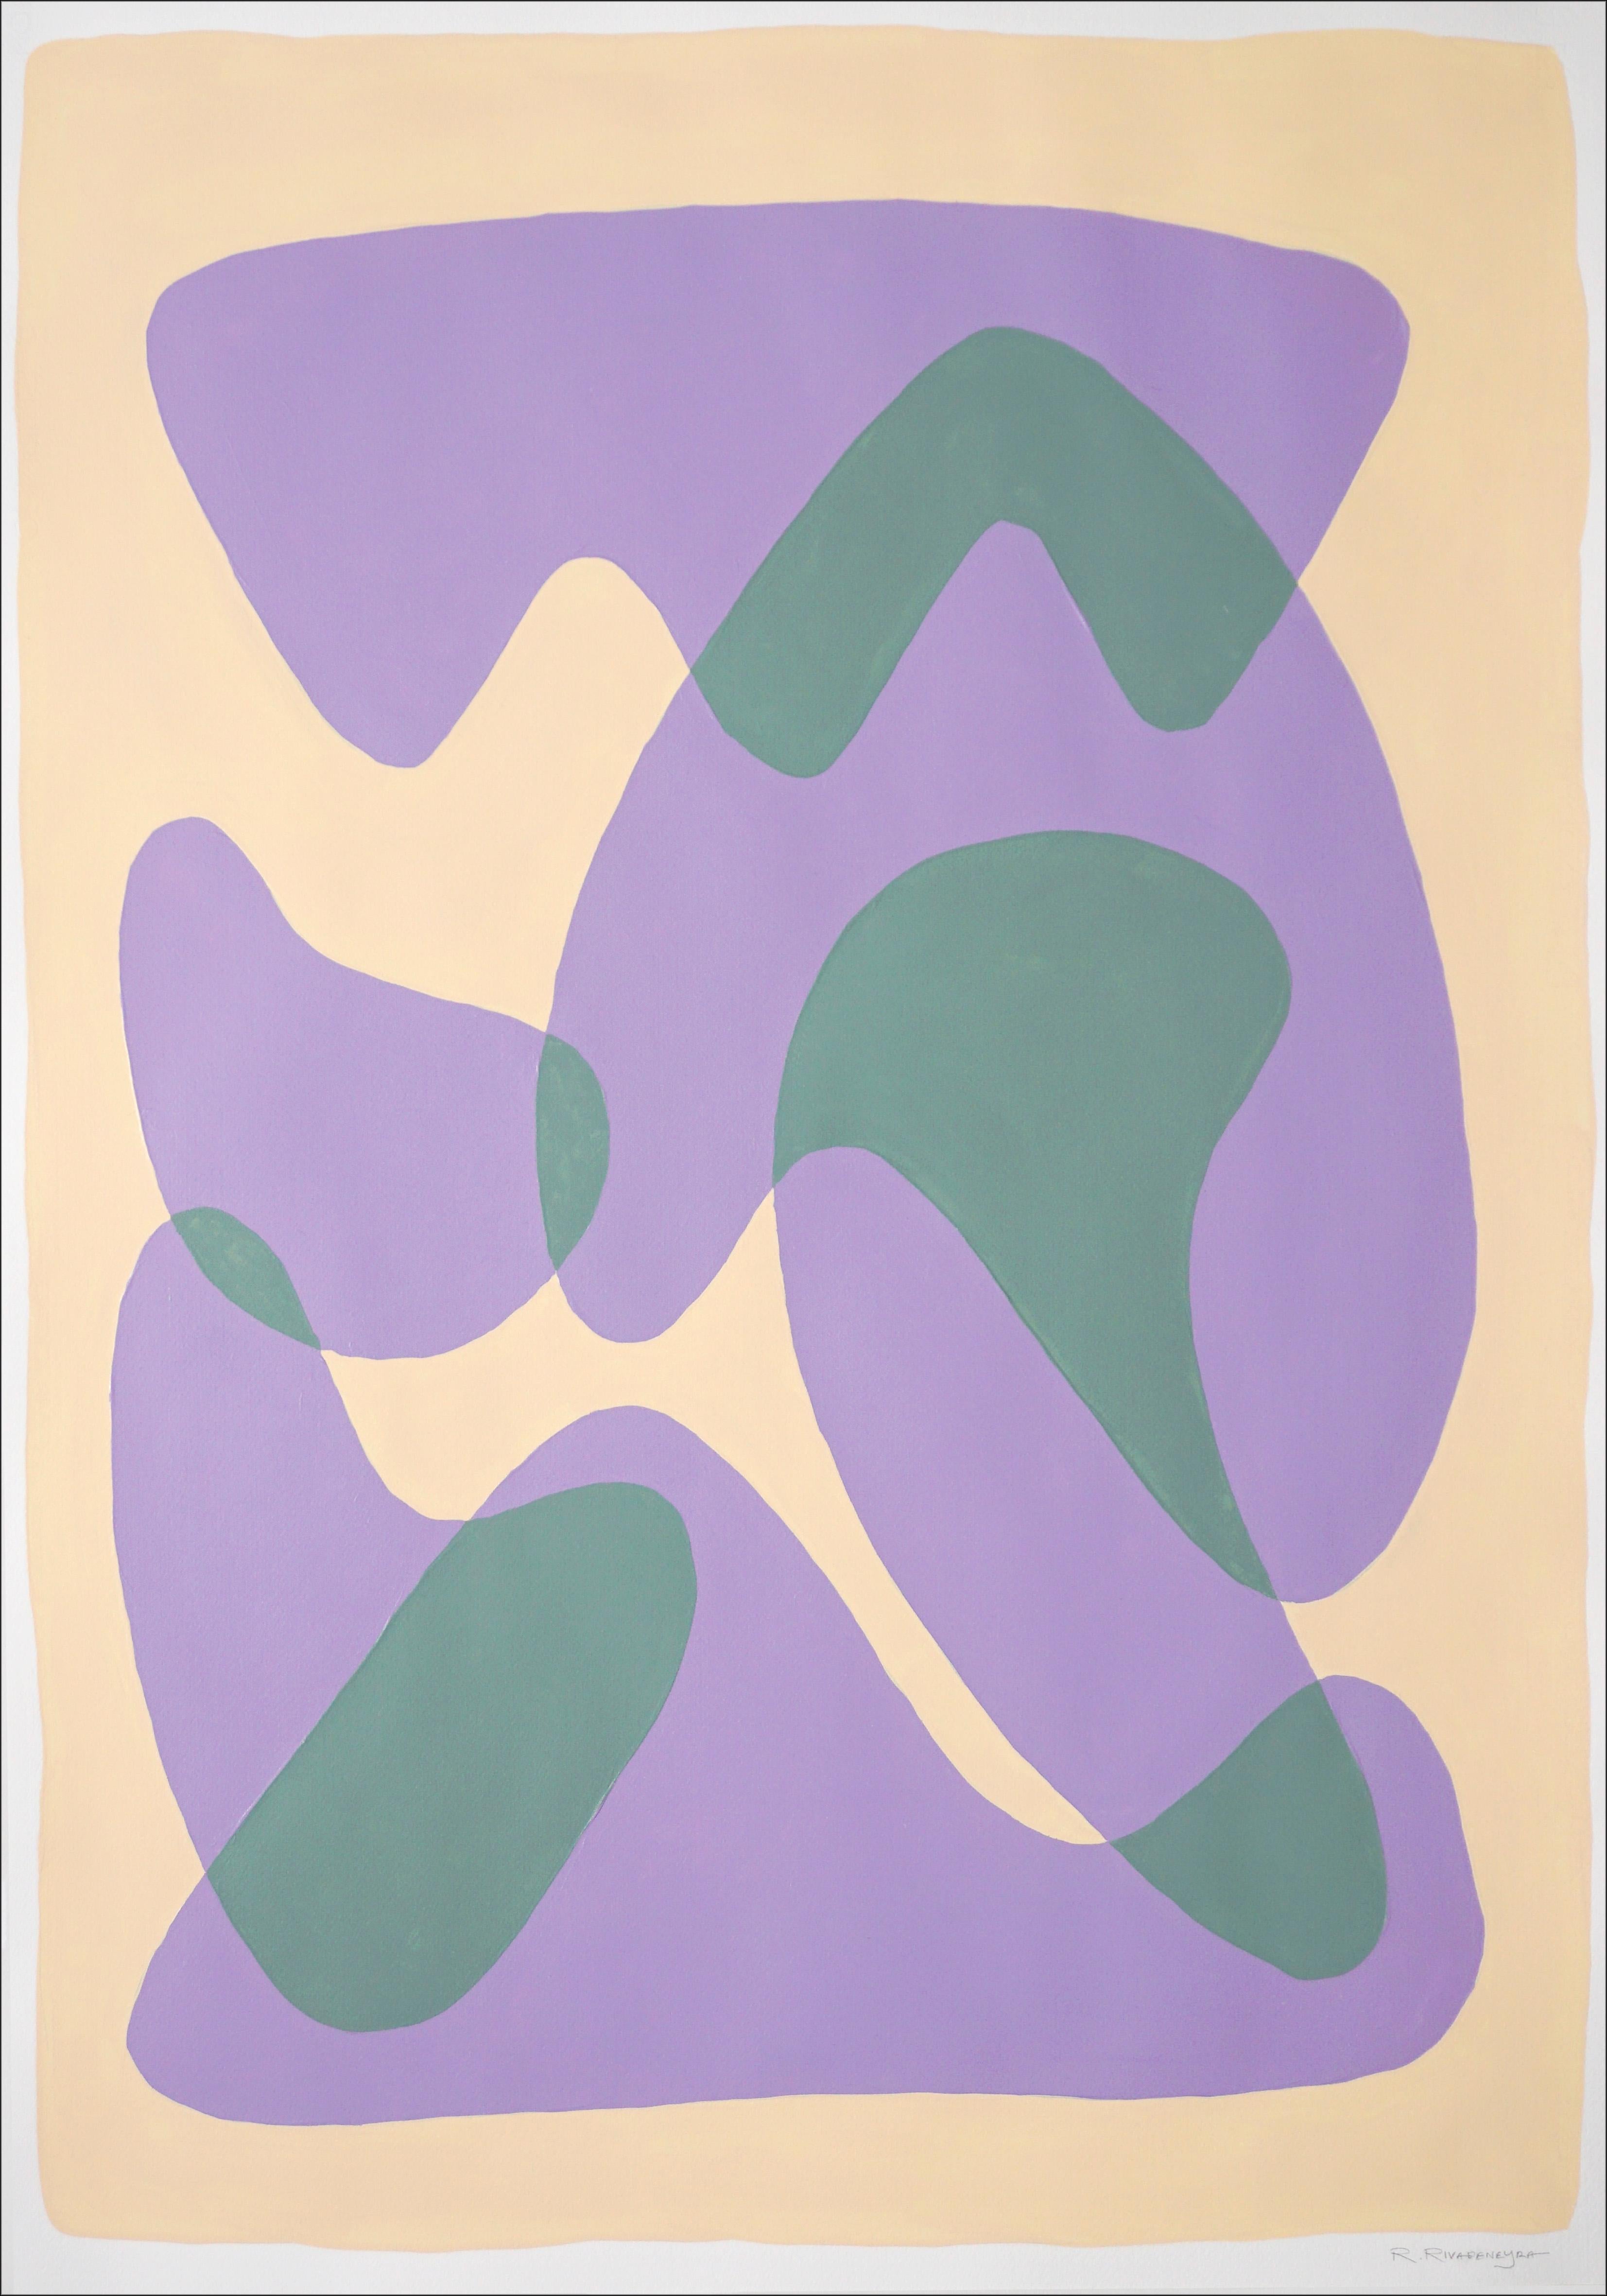 Ryan Rivadeneyra Figurative Painting - Modern Native Shapes in Mauve and Green, Tan Background, Mid-Century Style, 2022